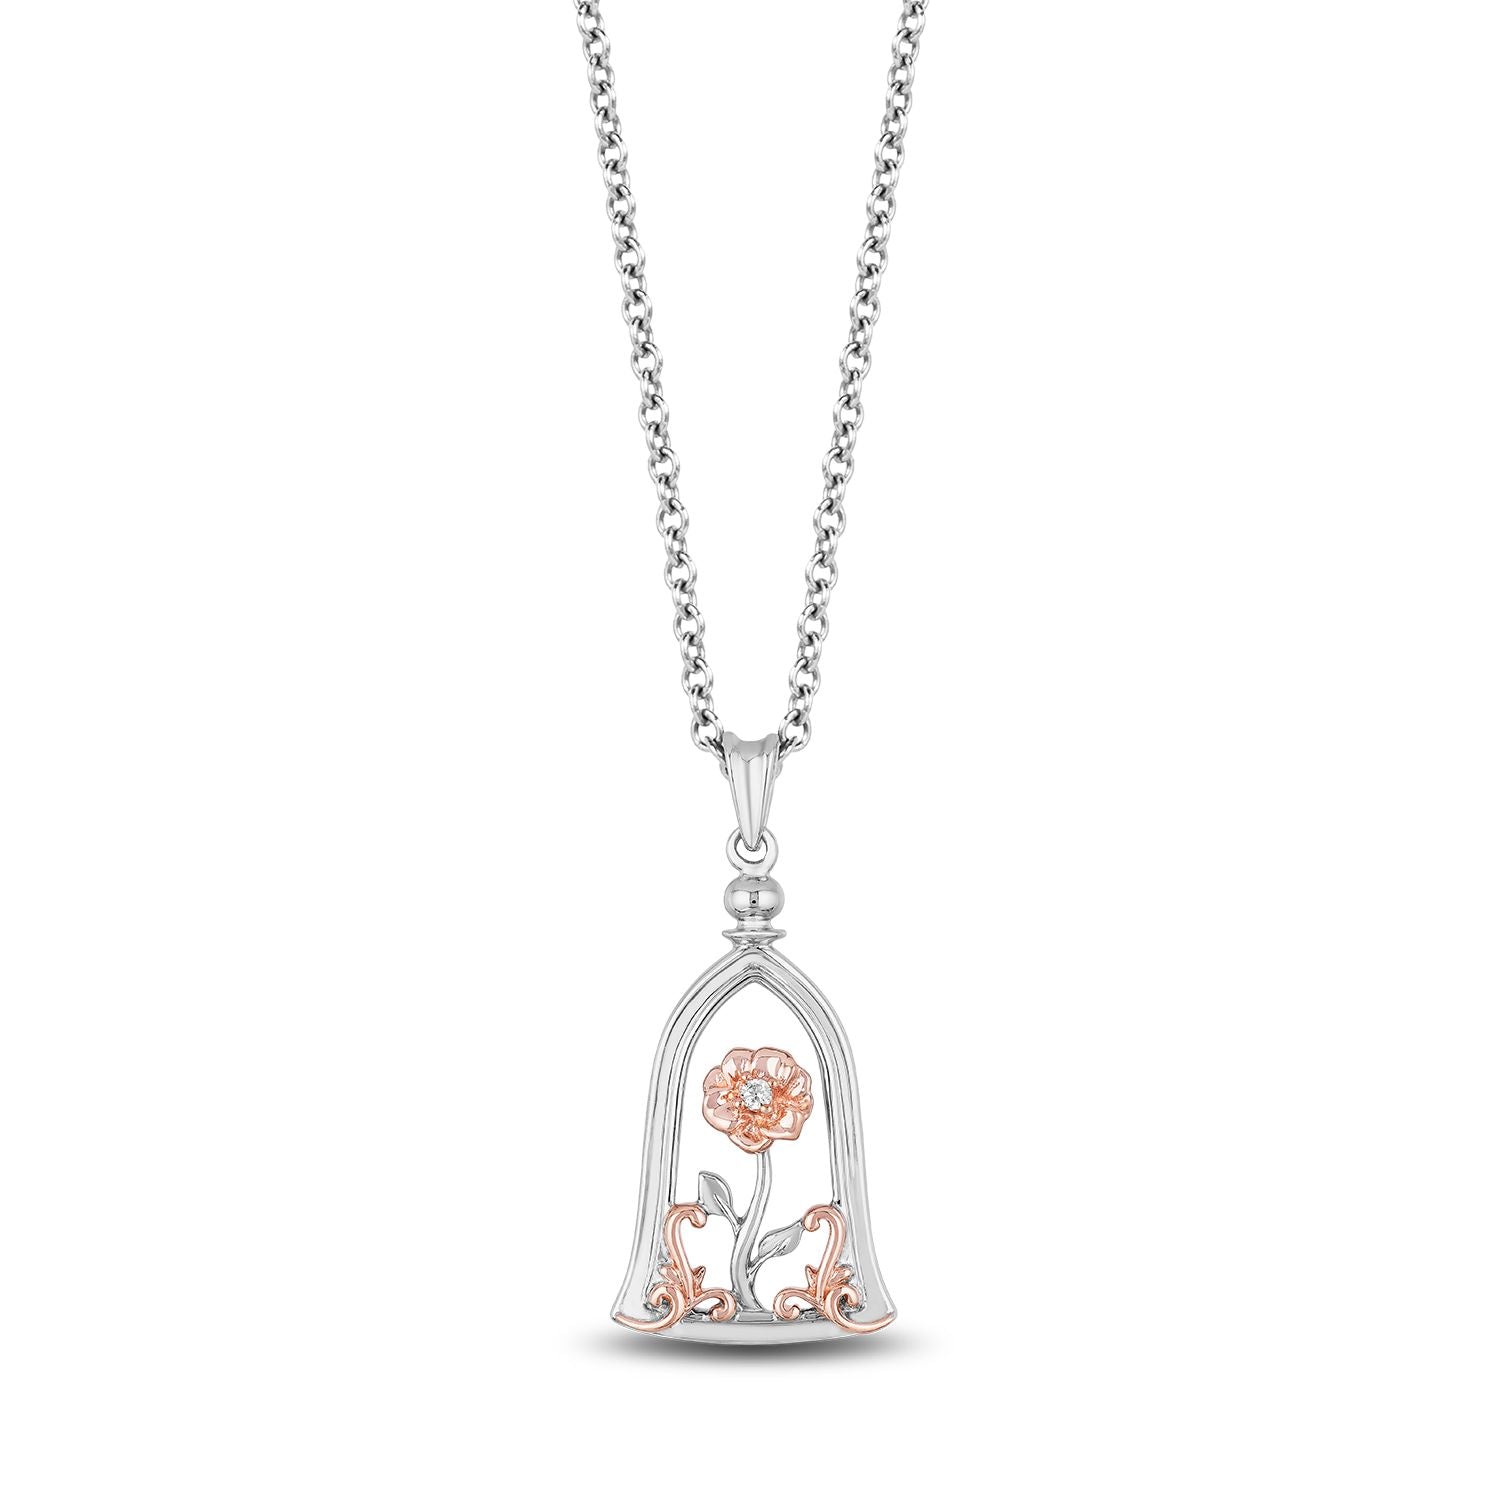 Belle & Bee Delicate Sterling Silver Necklace with Gold Star Charm